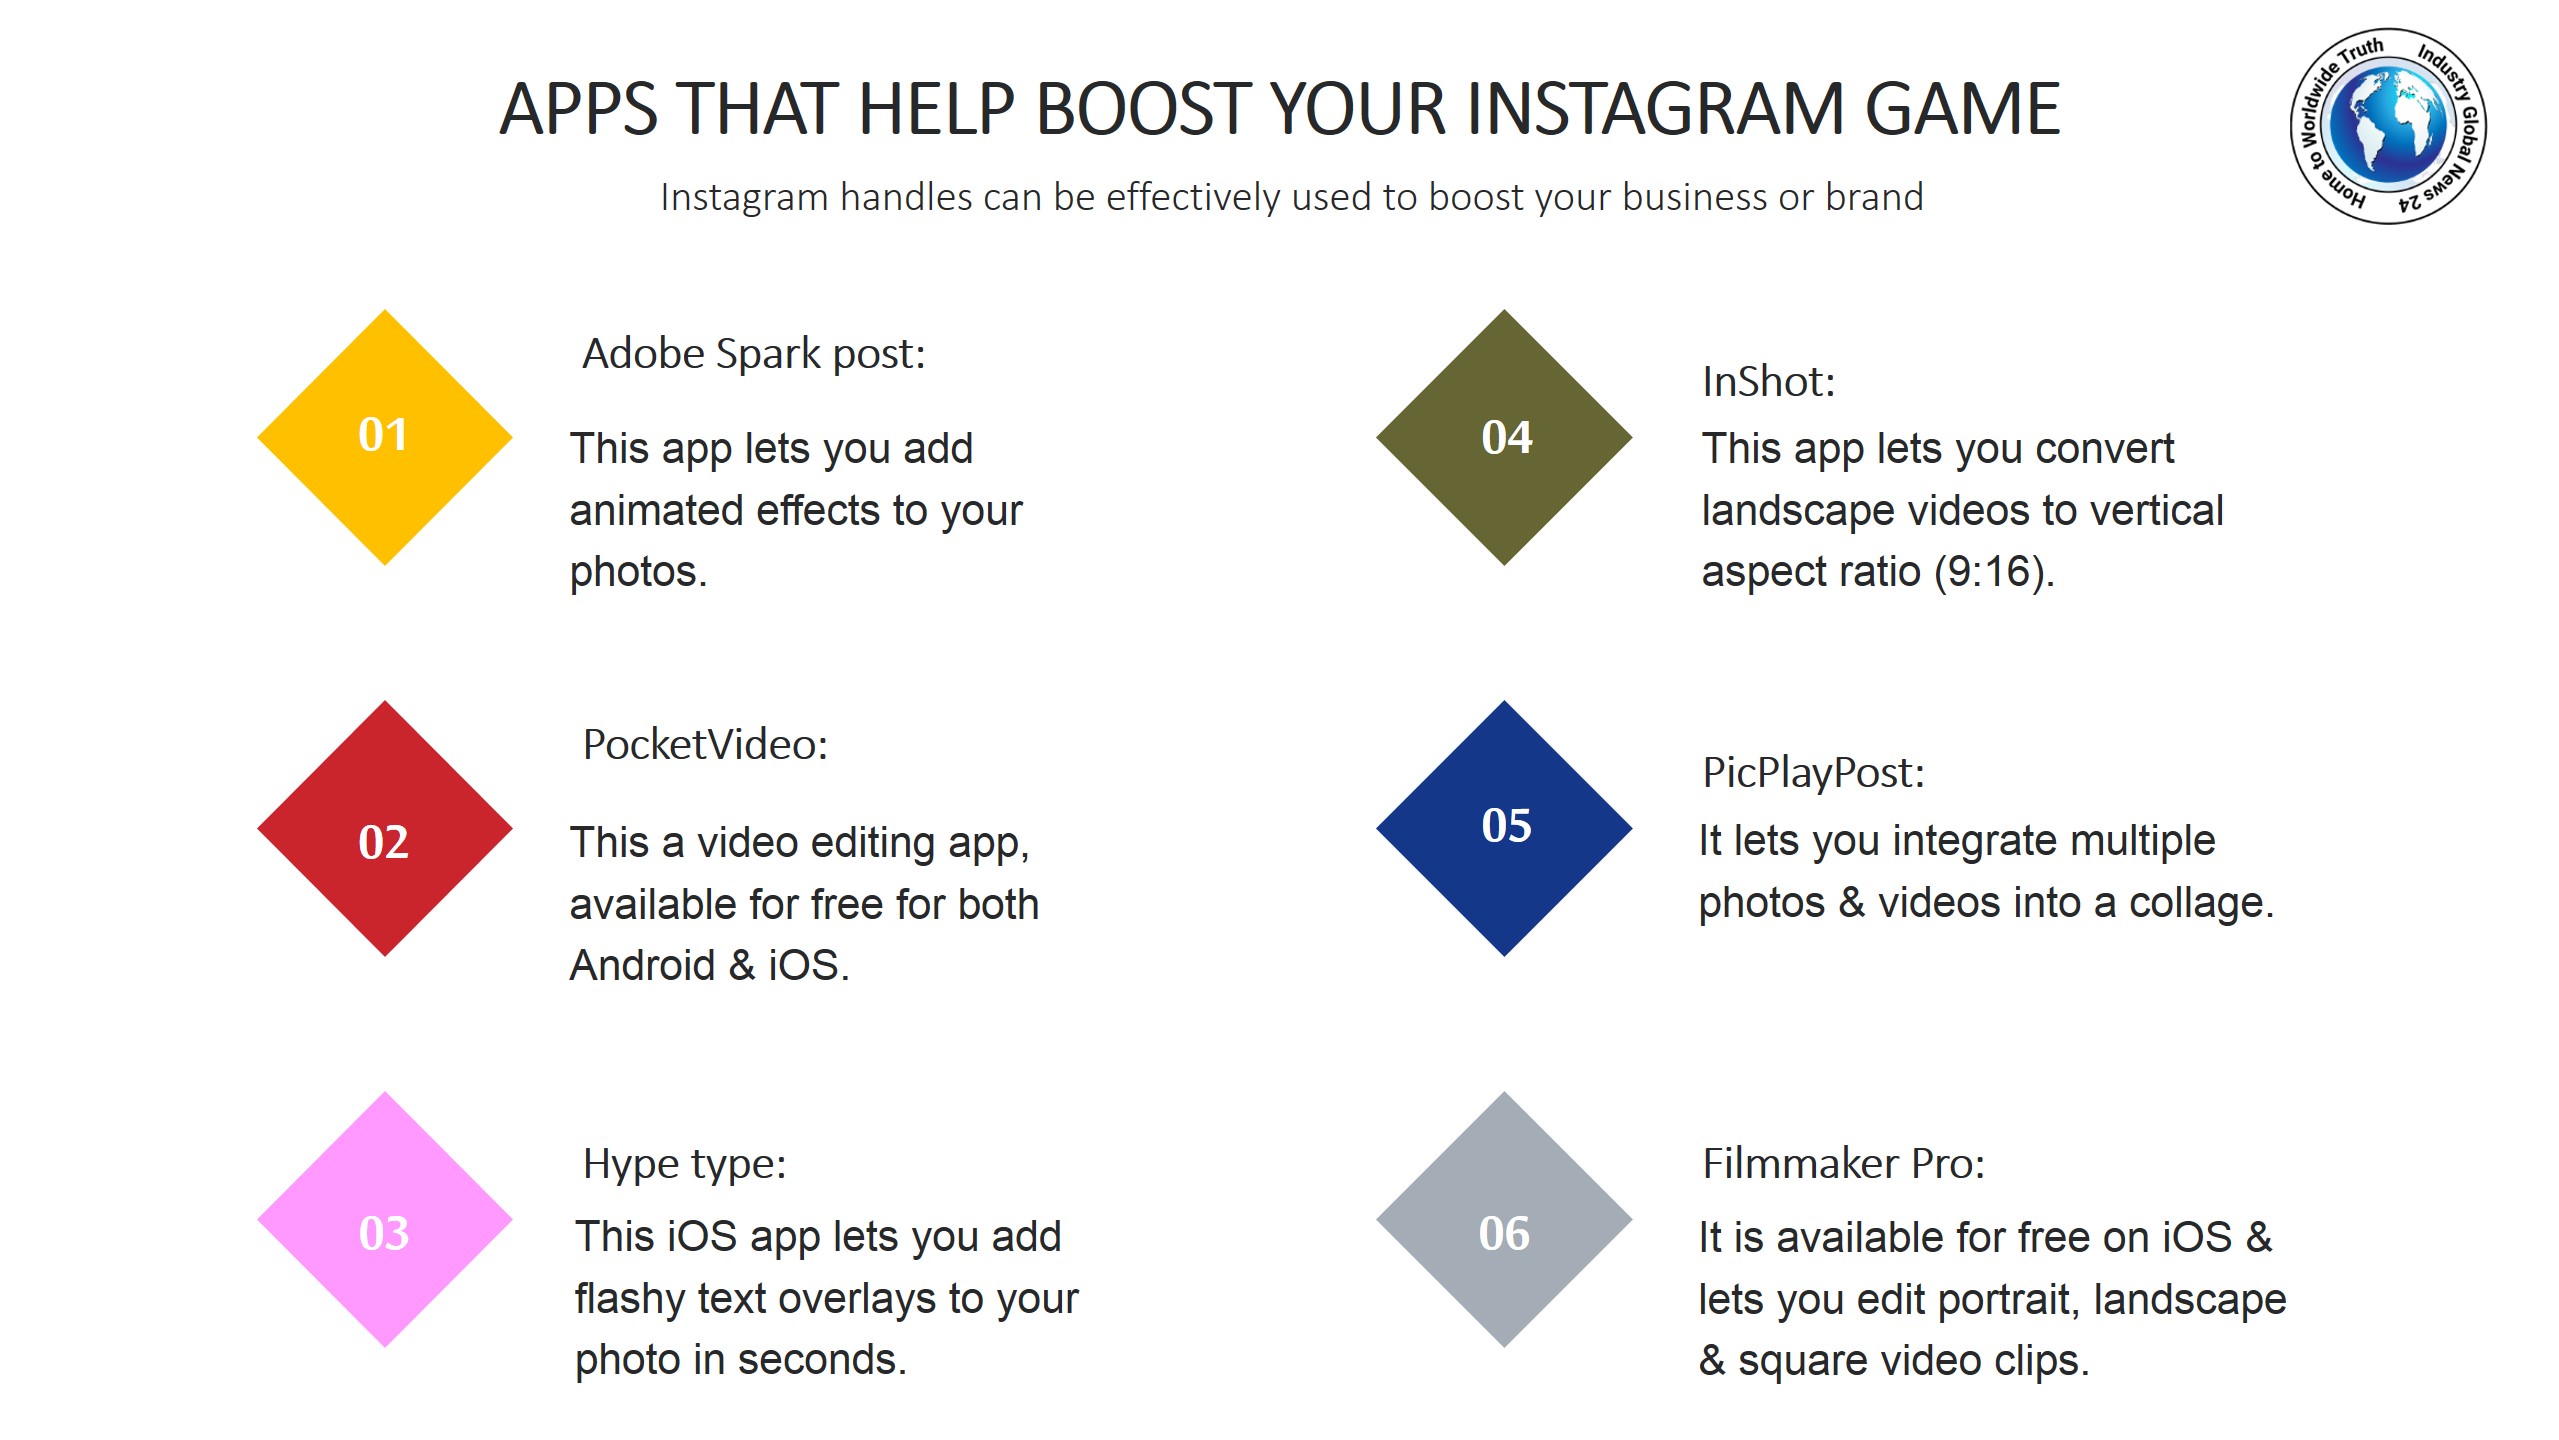 Apps that help to up your Instagram game